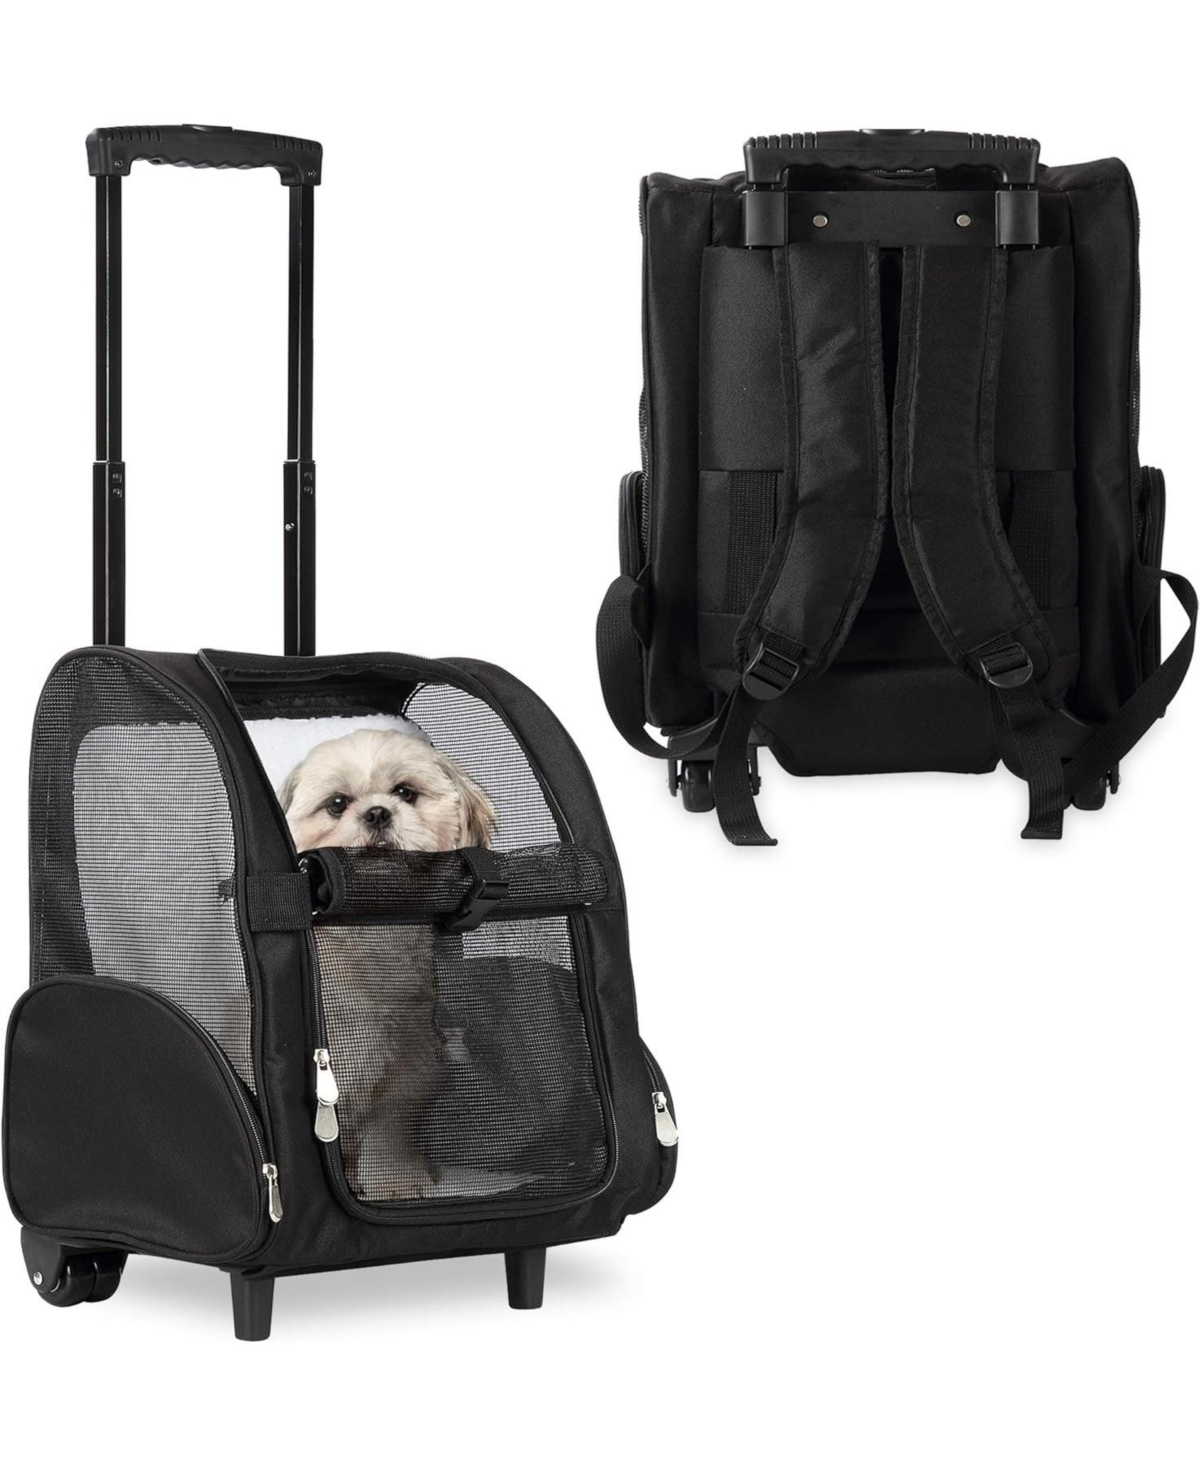 Backpack Pet Travel Carrier with Double Wheels Large - Grey